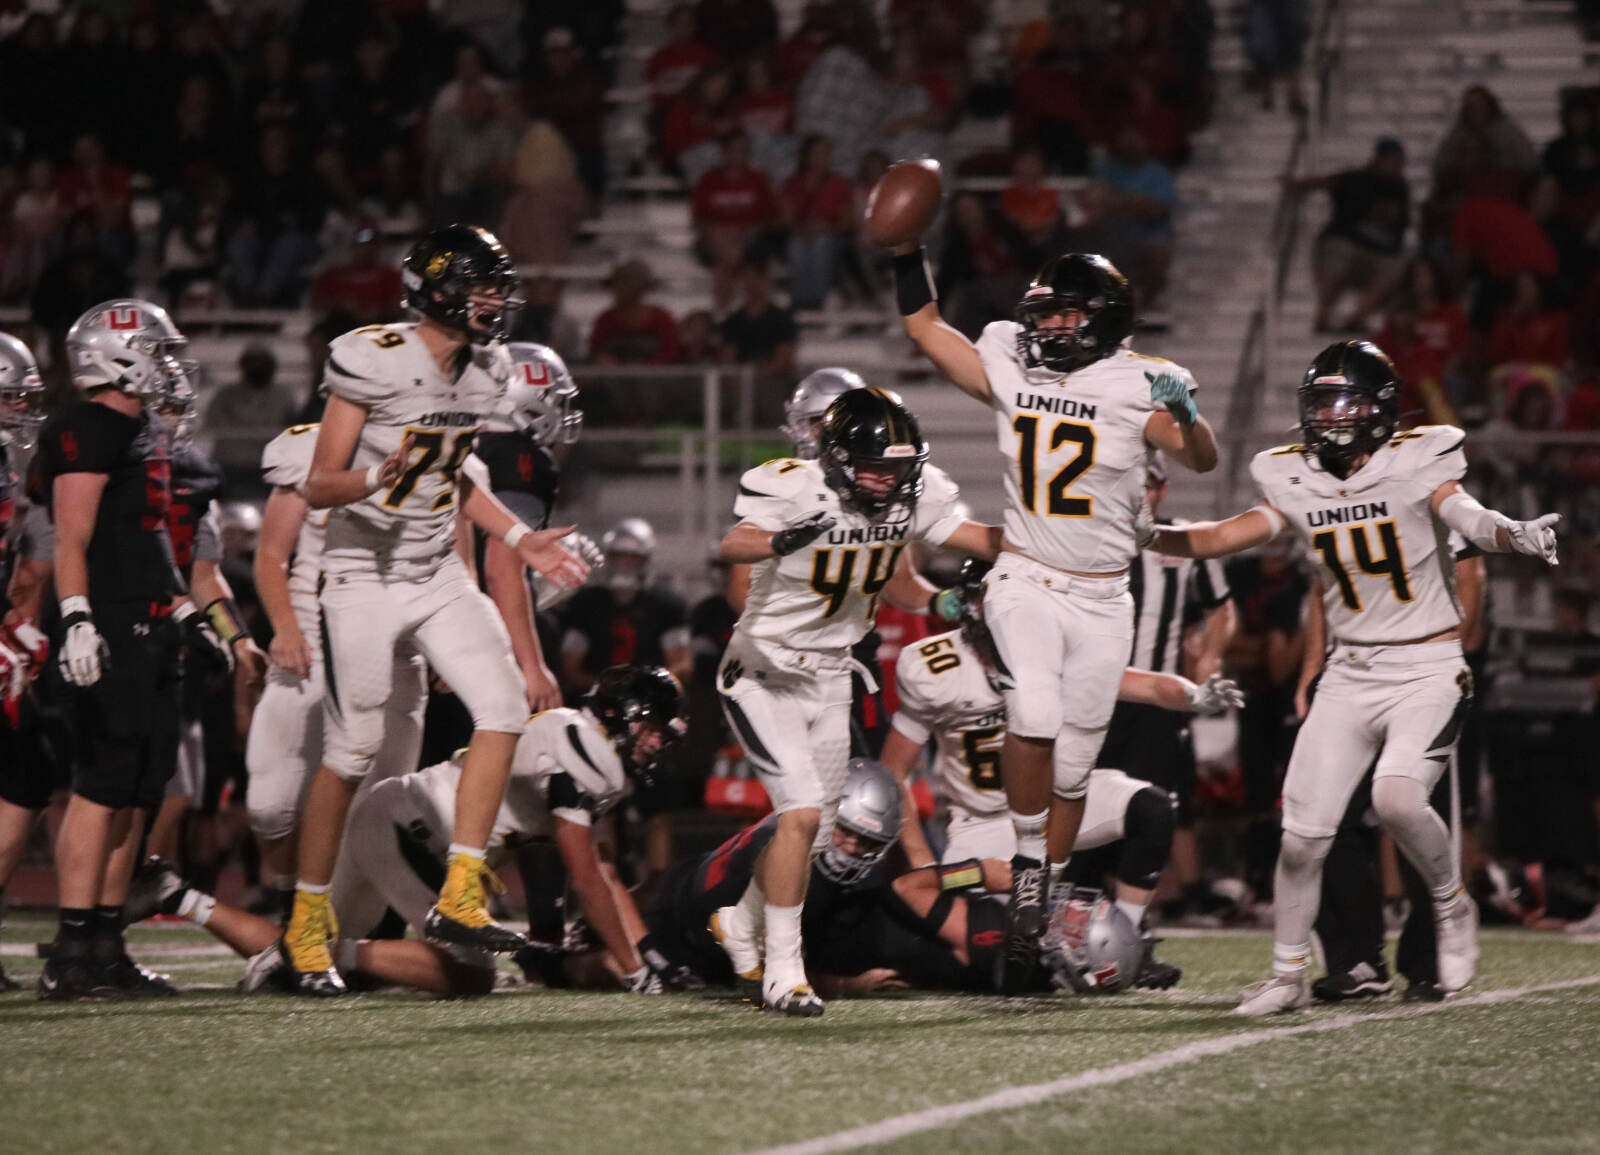 Jacob Sasser forced and recovered fumble from Uintah QB